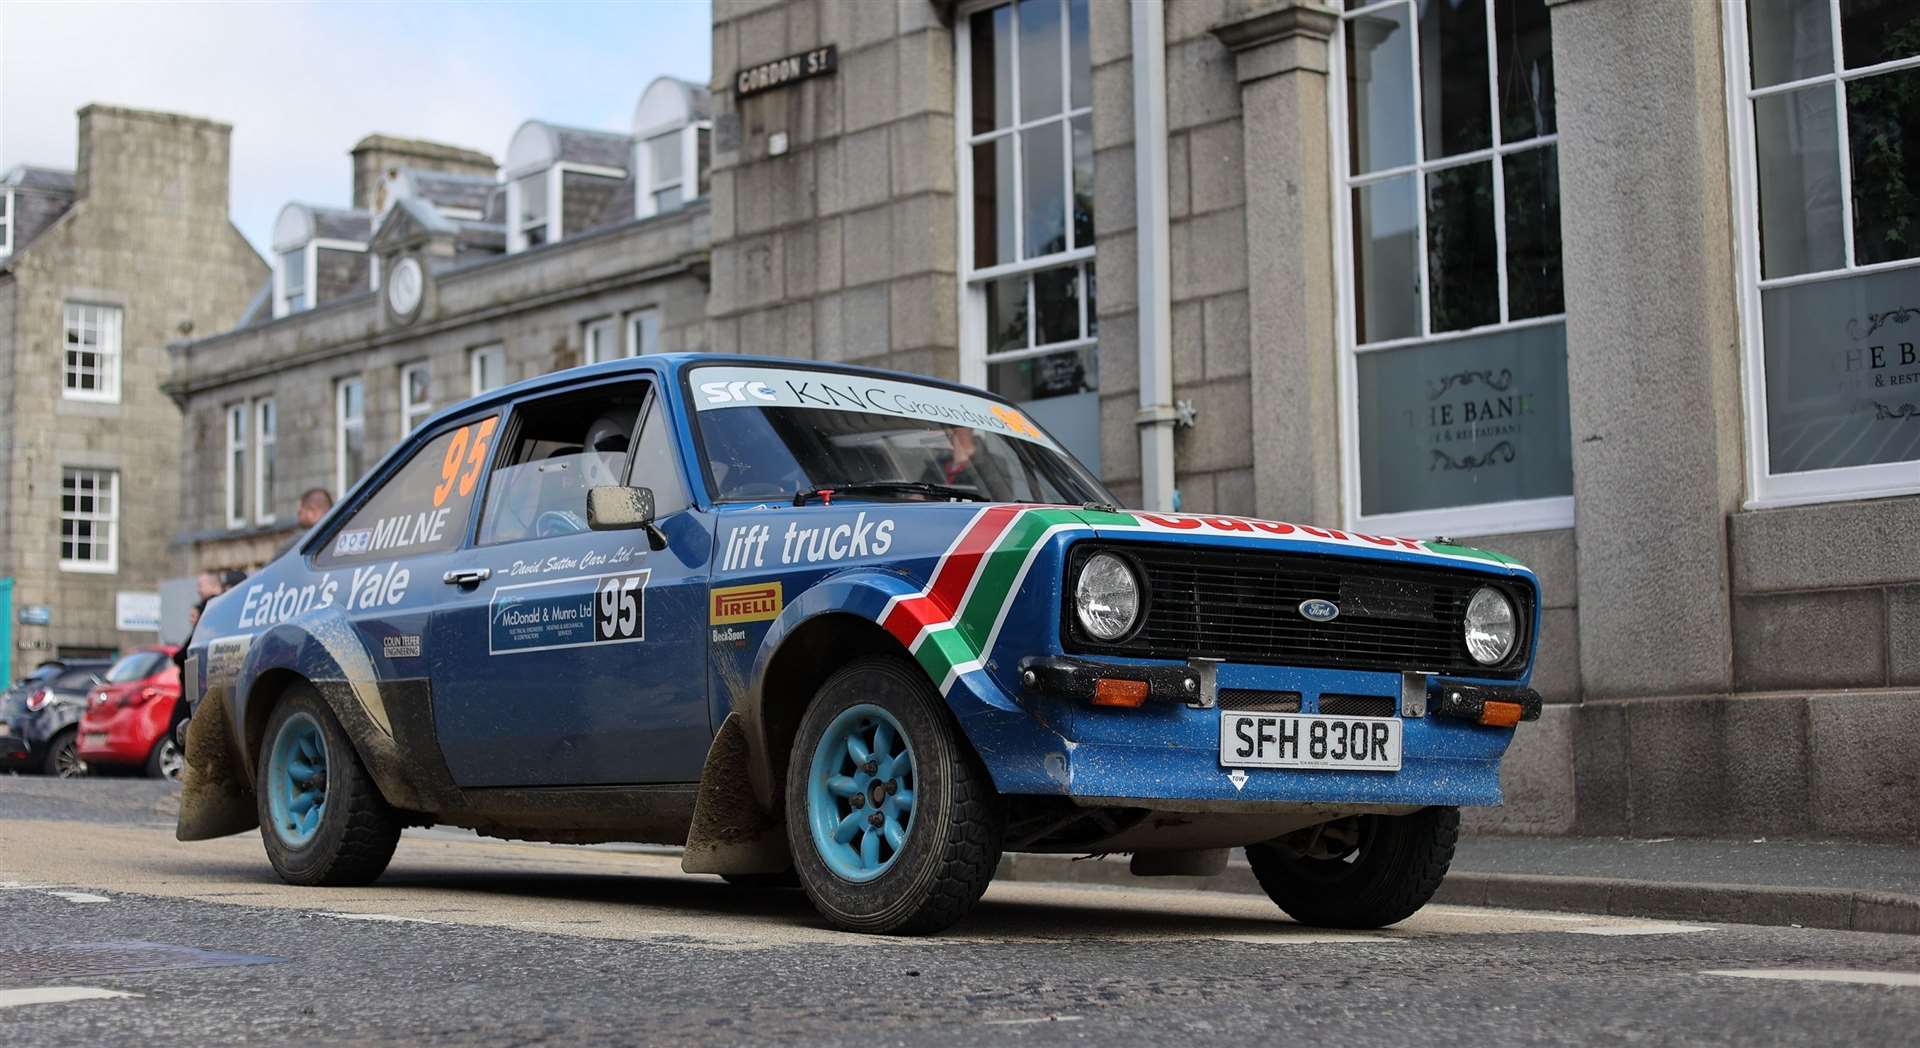 One of the rally cars in Huntly was this Ford.